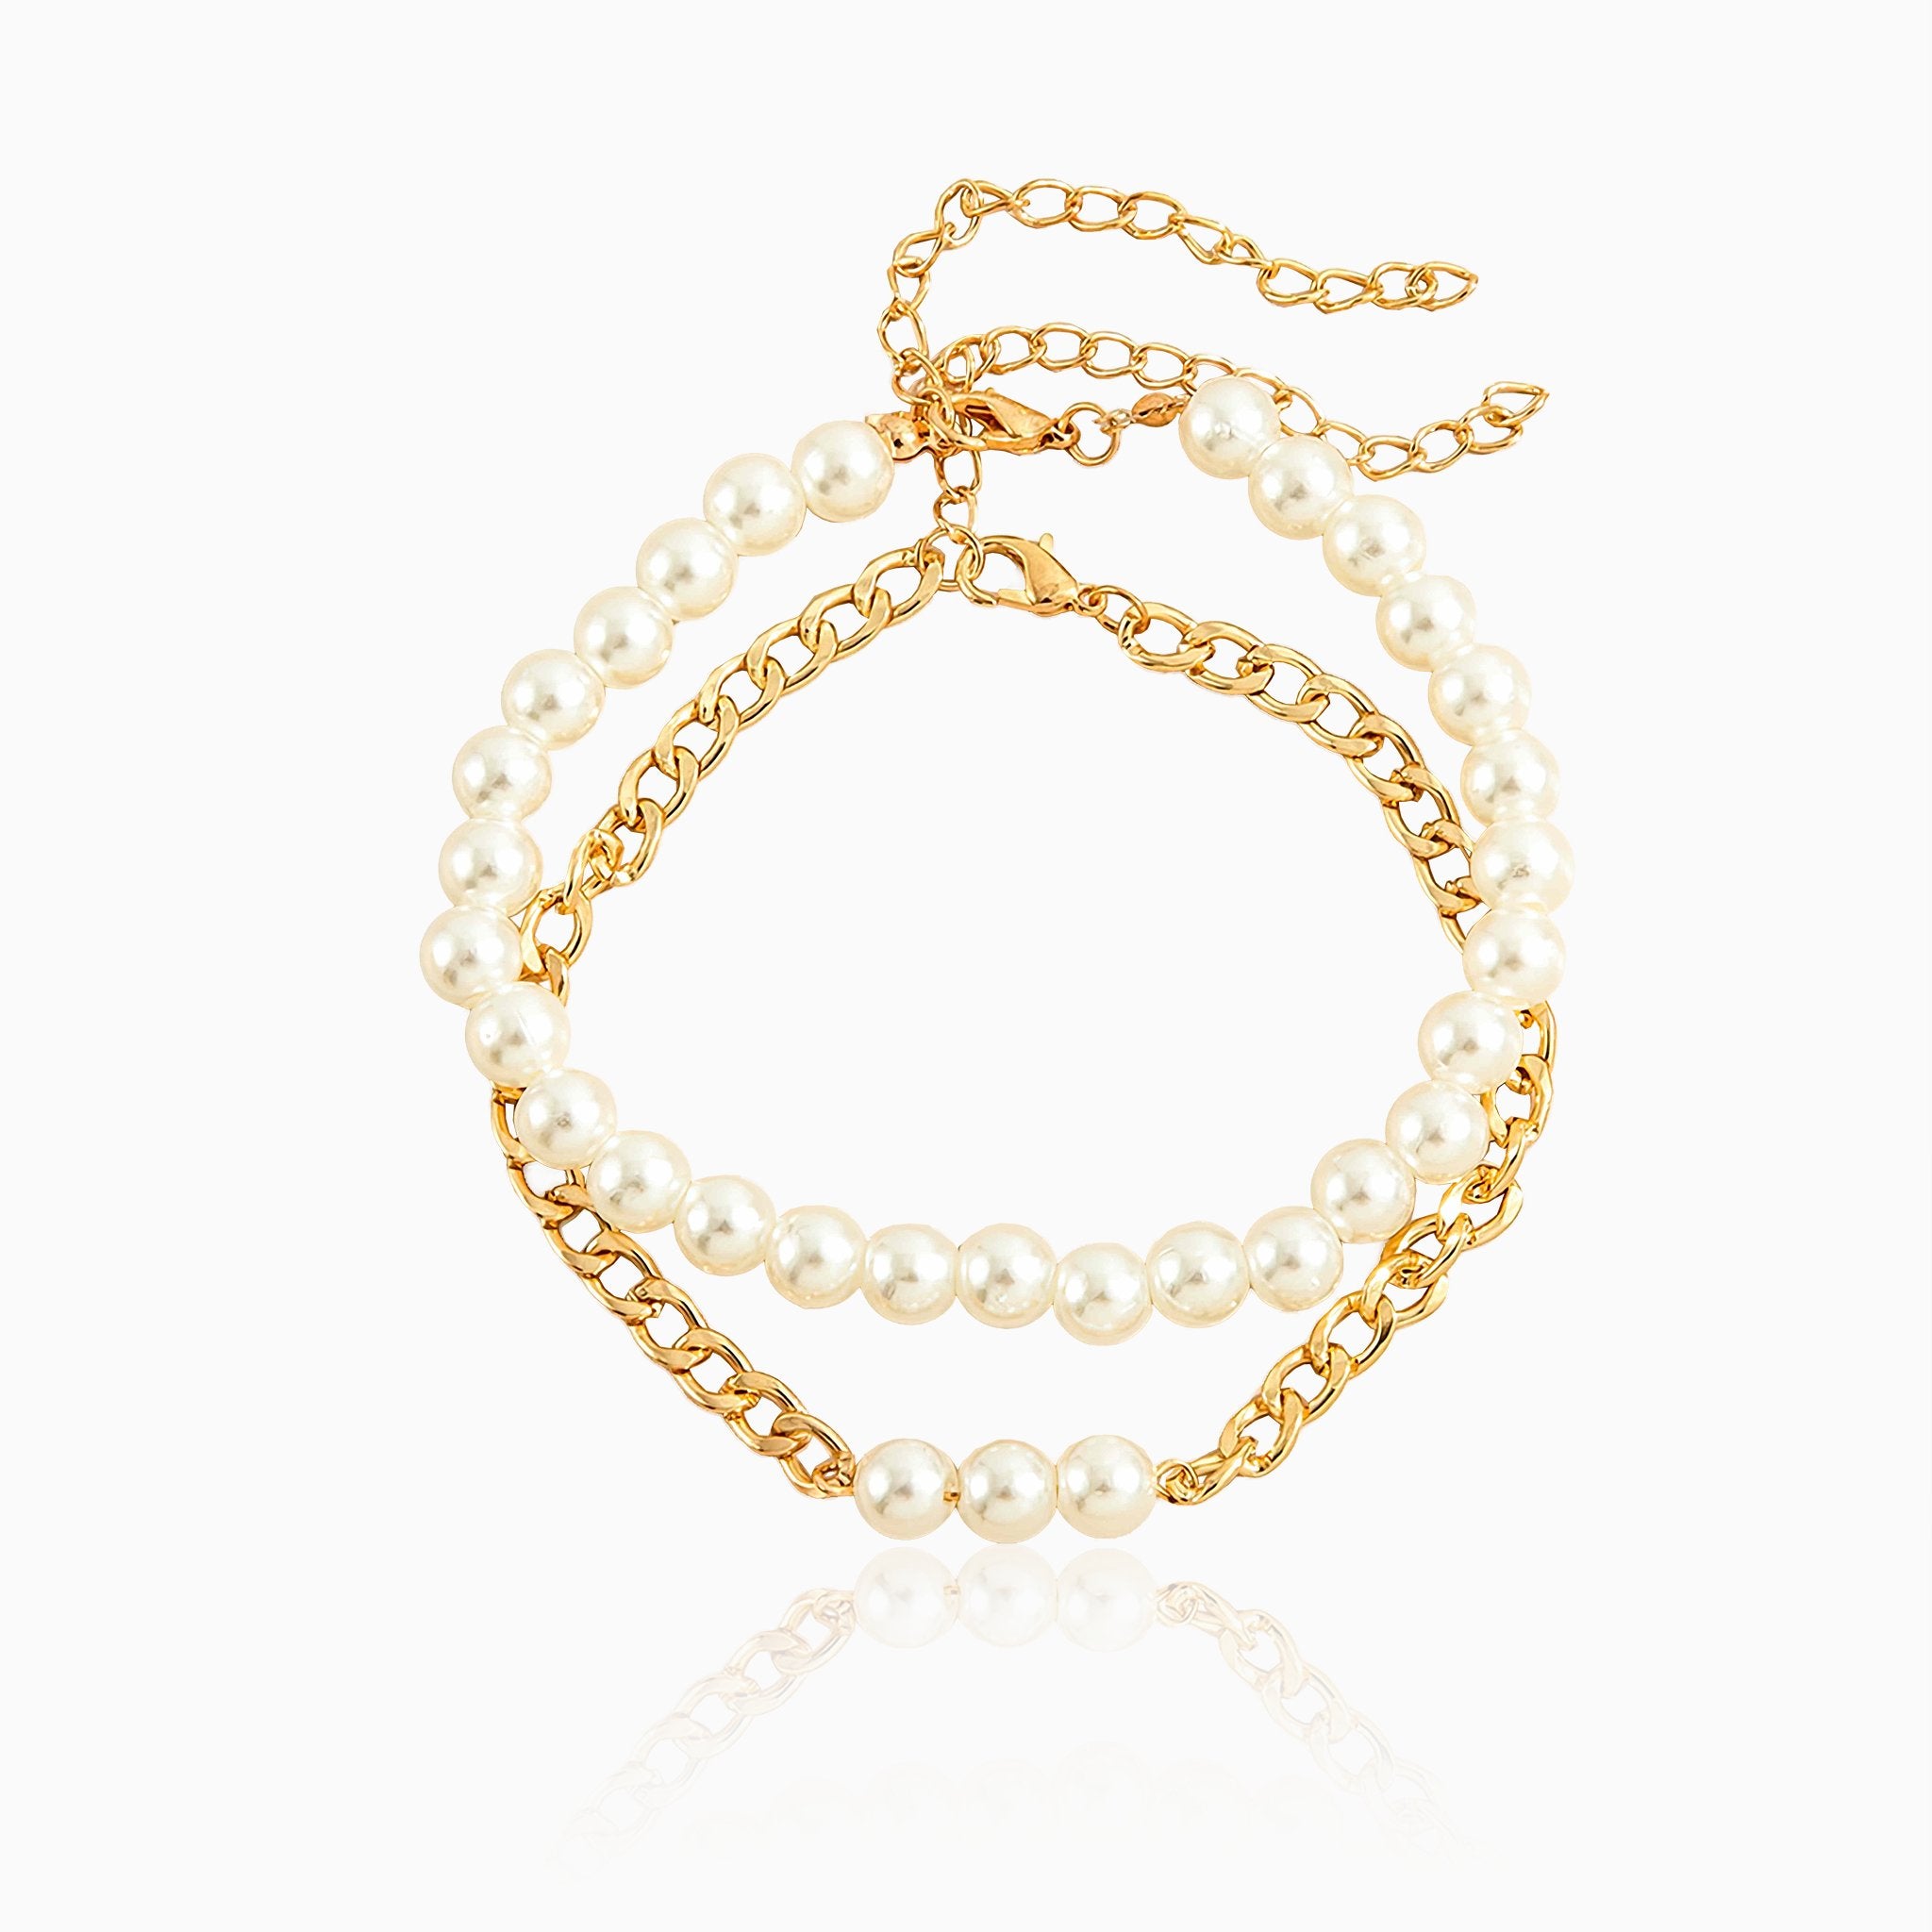 Simple Pearl & Chain Two-Piece Anklet - Nobbier - Anklet - 18K Gold And Titanium PVD Coated Jewelry